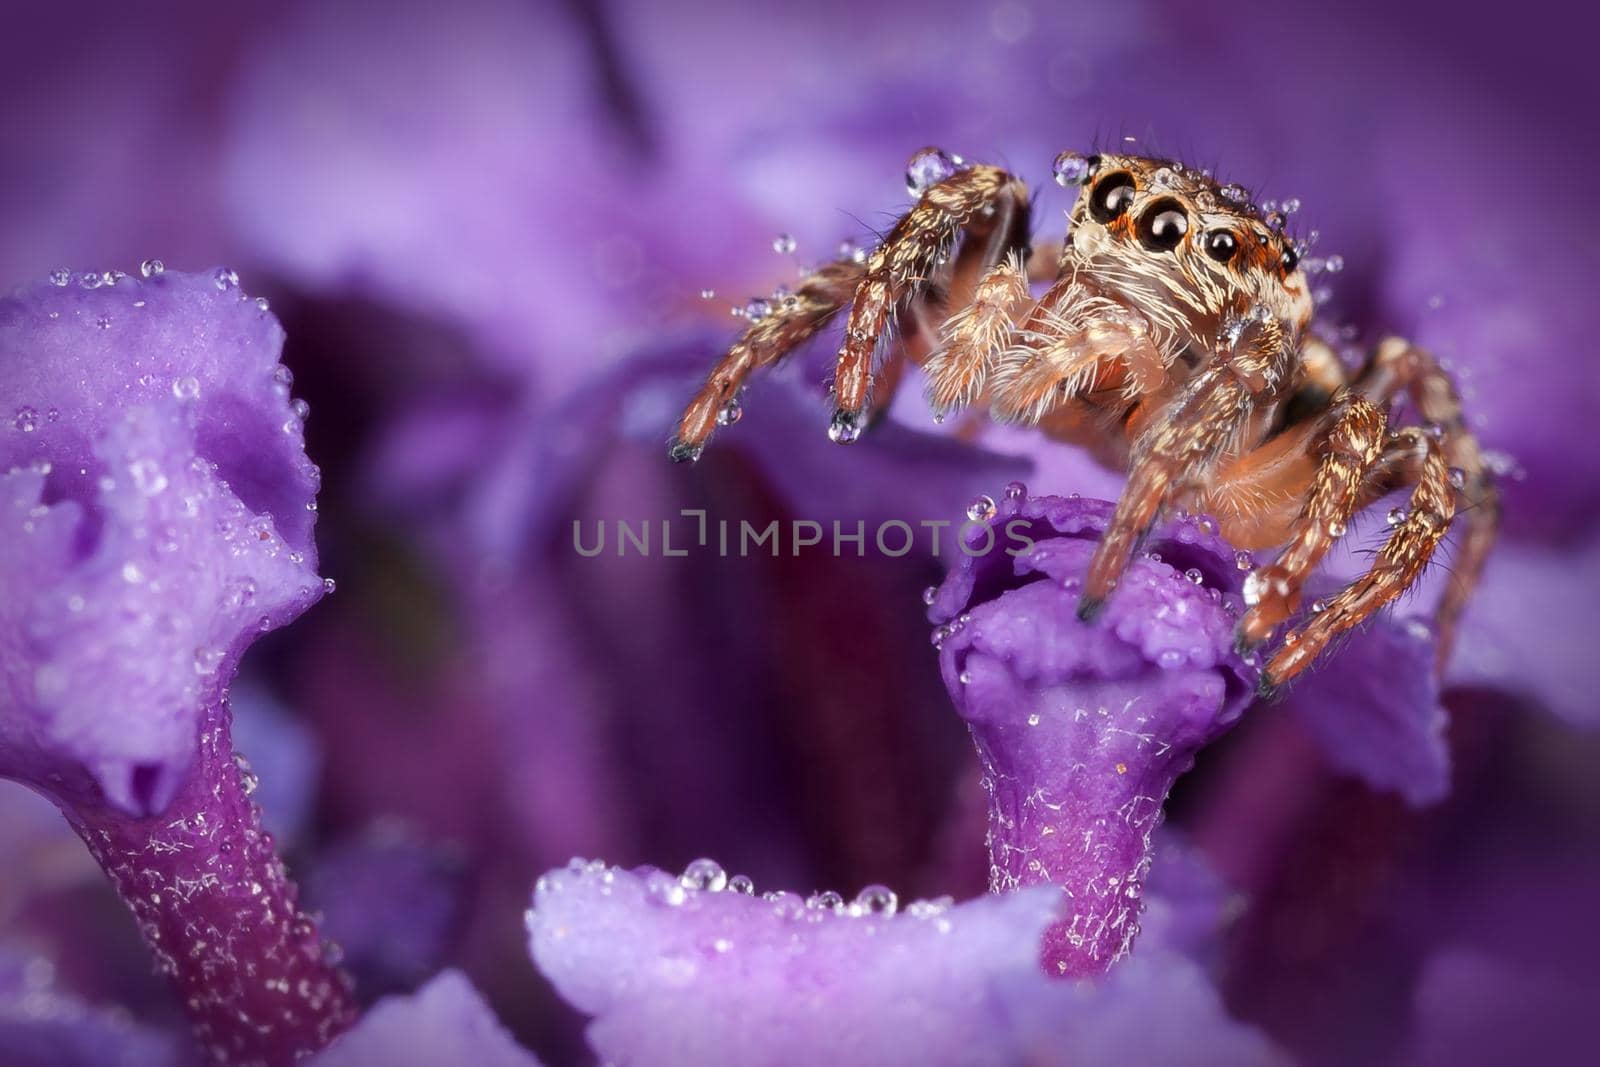 Jumping spider all covered with dew drops on the nice purple flower